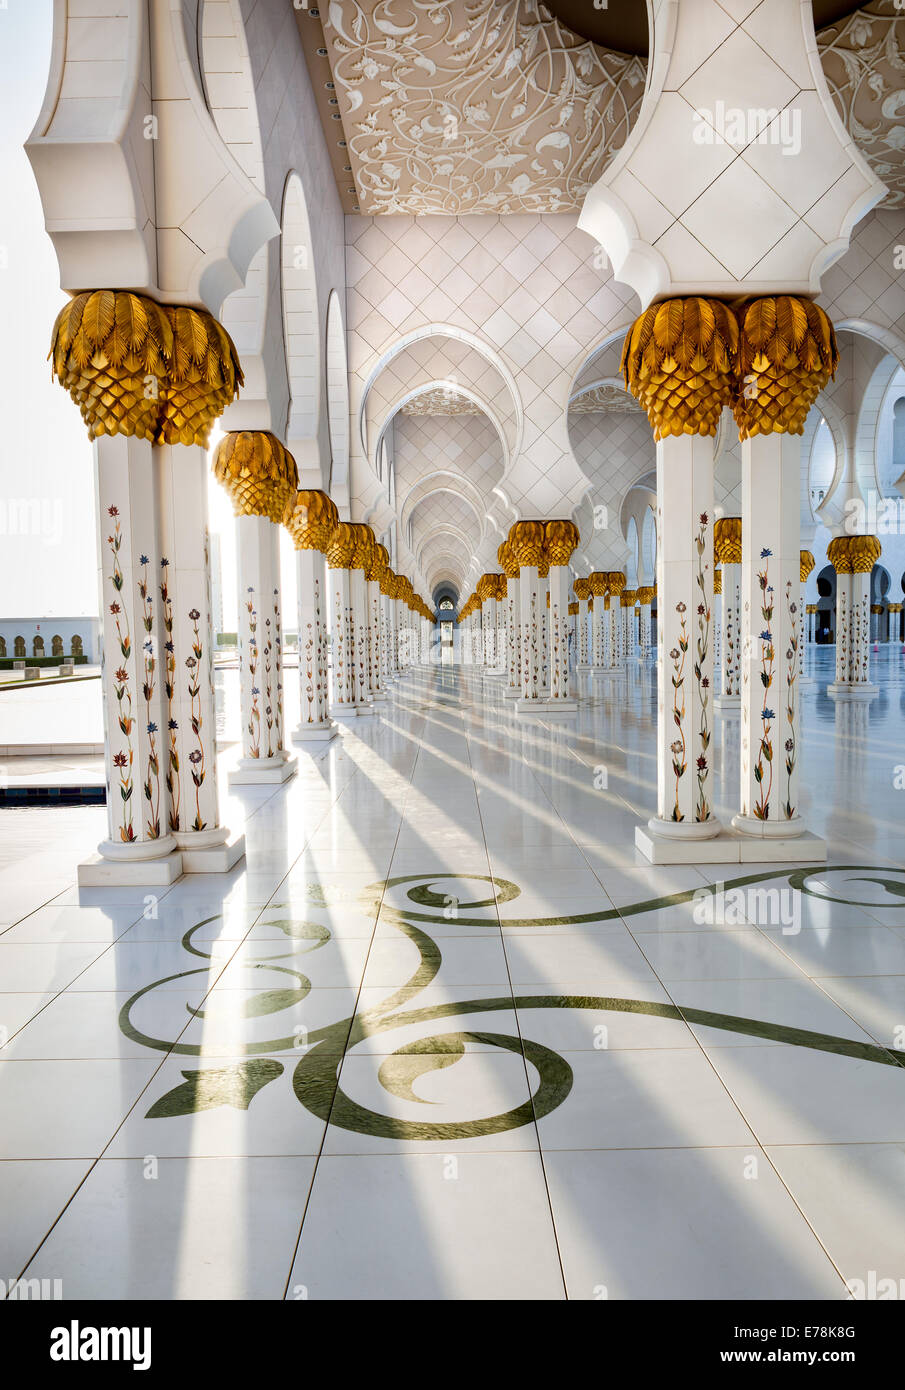 Corridor of Sheikh Zayed Mosque Abu Dhabi, which is intricately decorated and designed Stock Photo